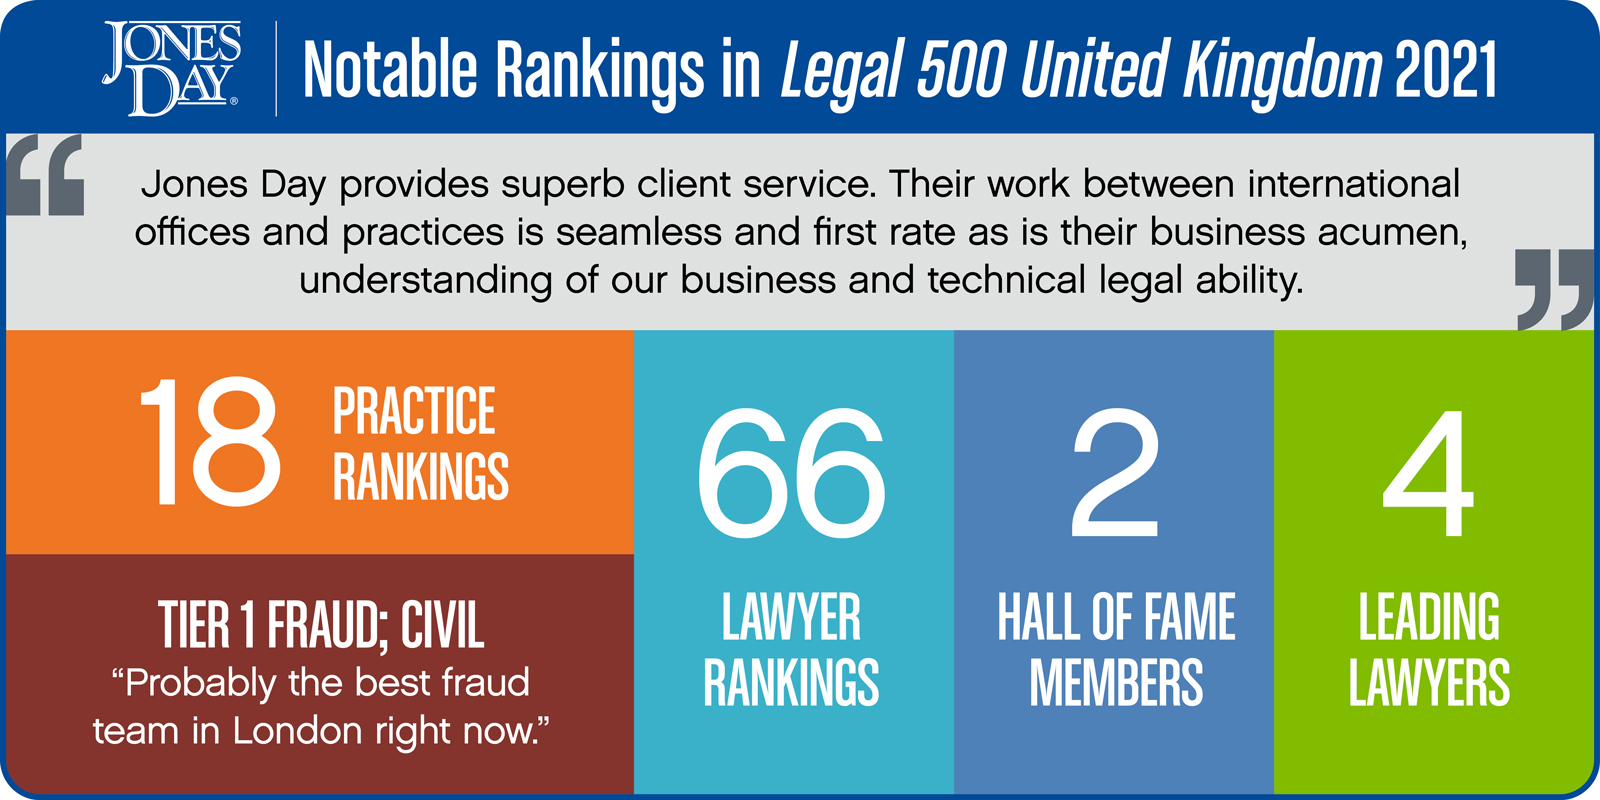 Legal500UKInfographic_2021